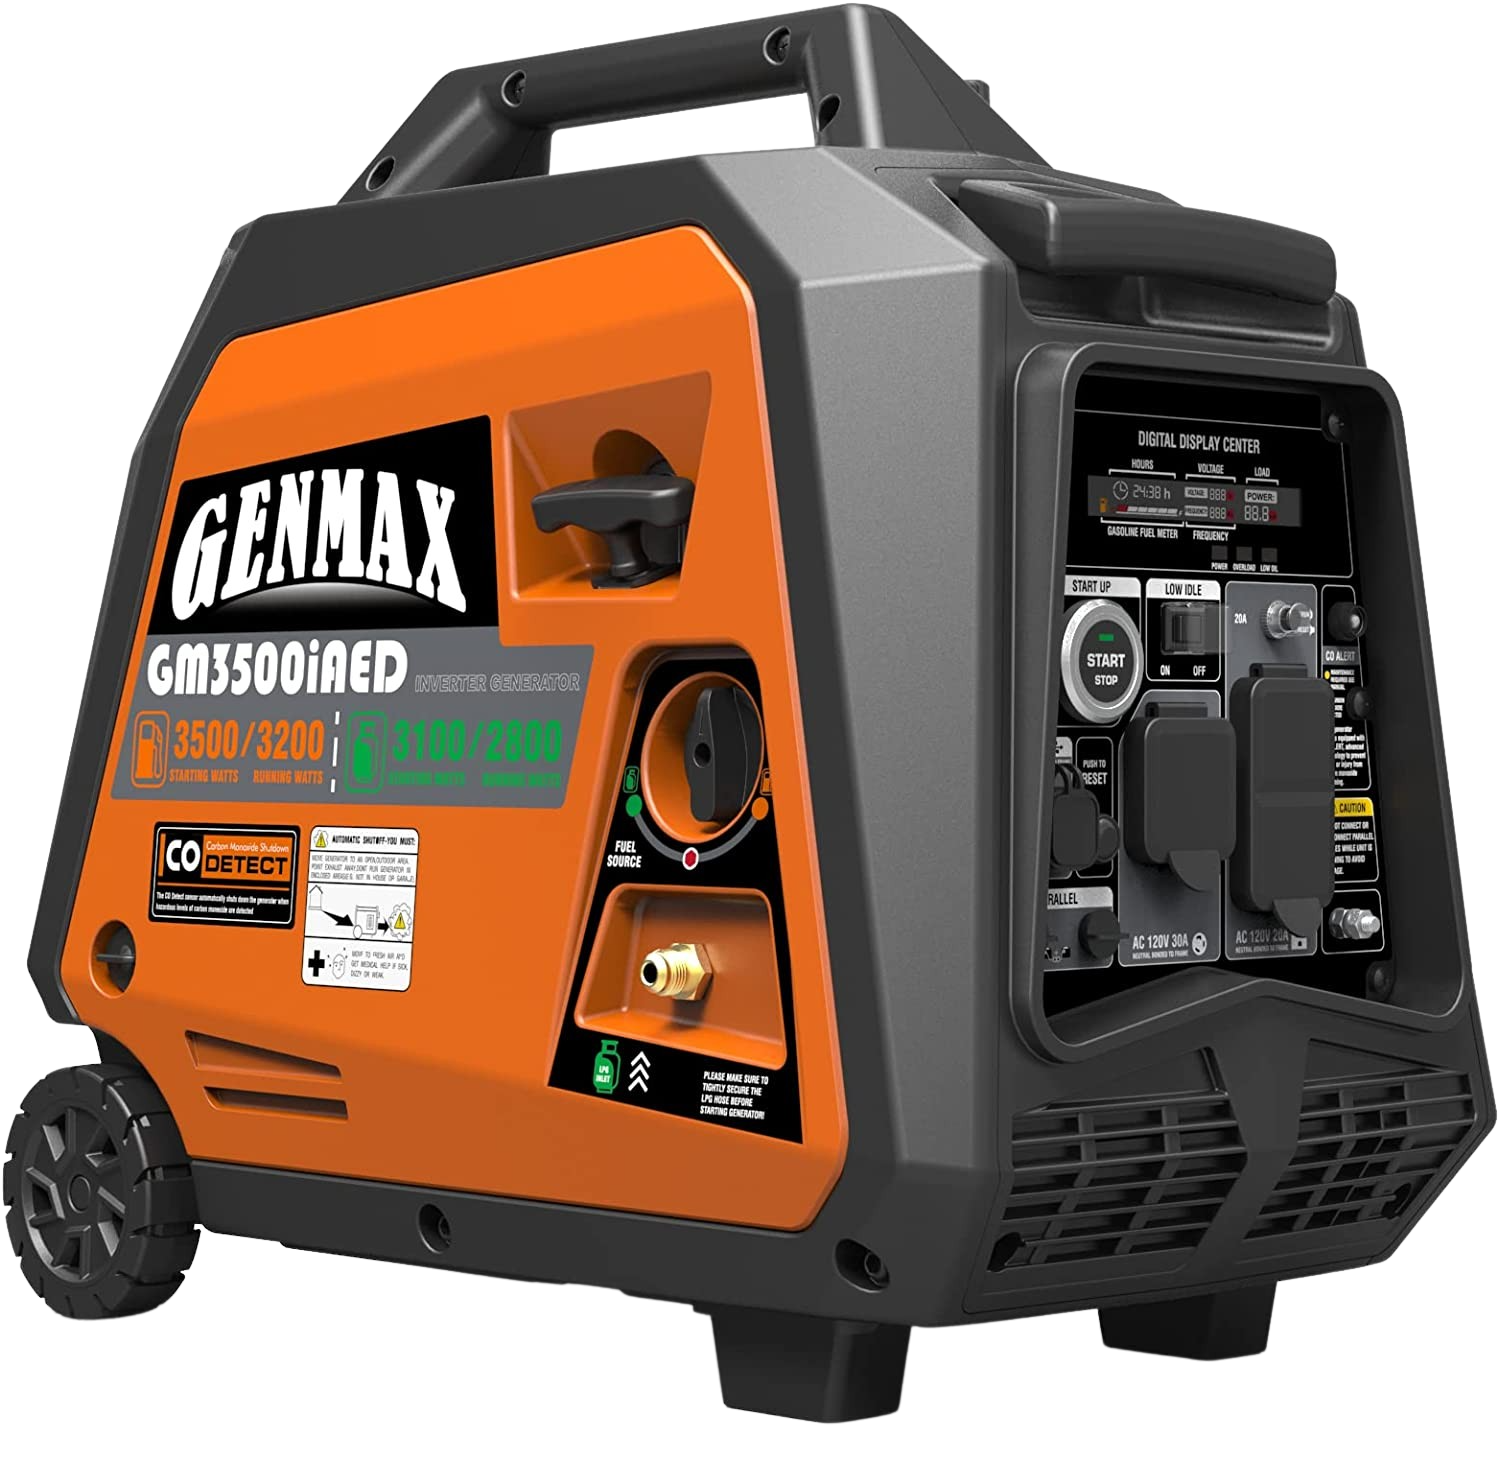 GENMAX, GENMAX GM3500iAED 30 Amp 3200W/3500W Remote Start Dual Fuel Inverter Generator with CO Detect New